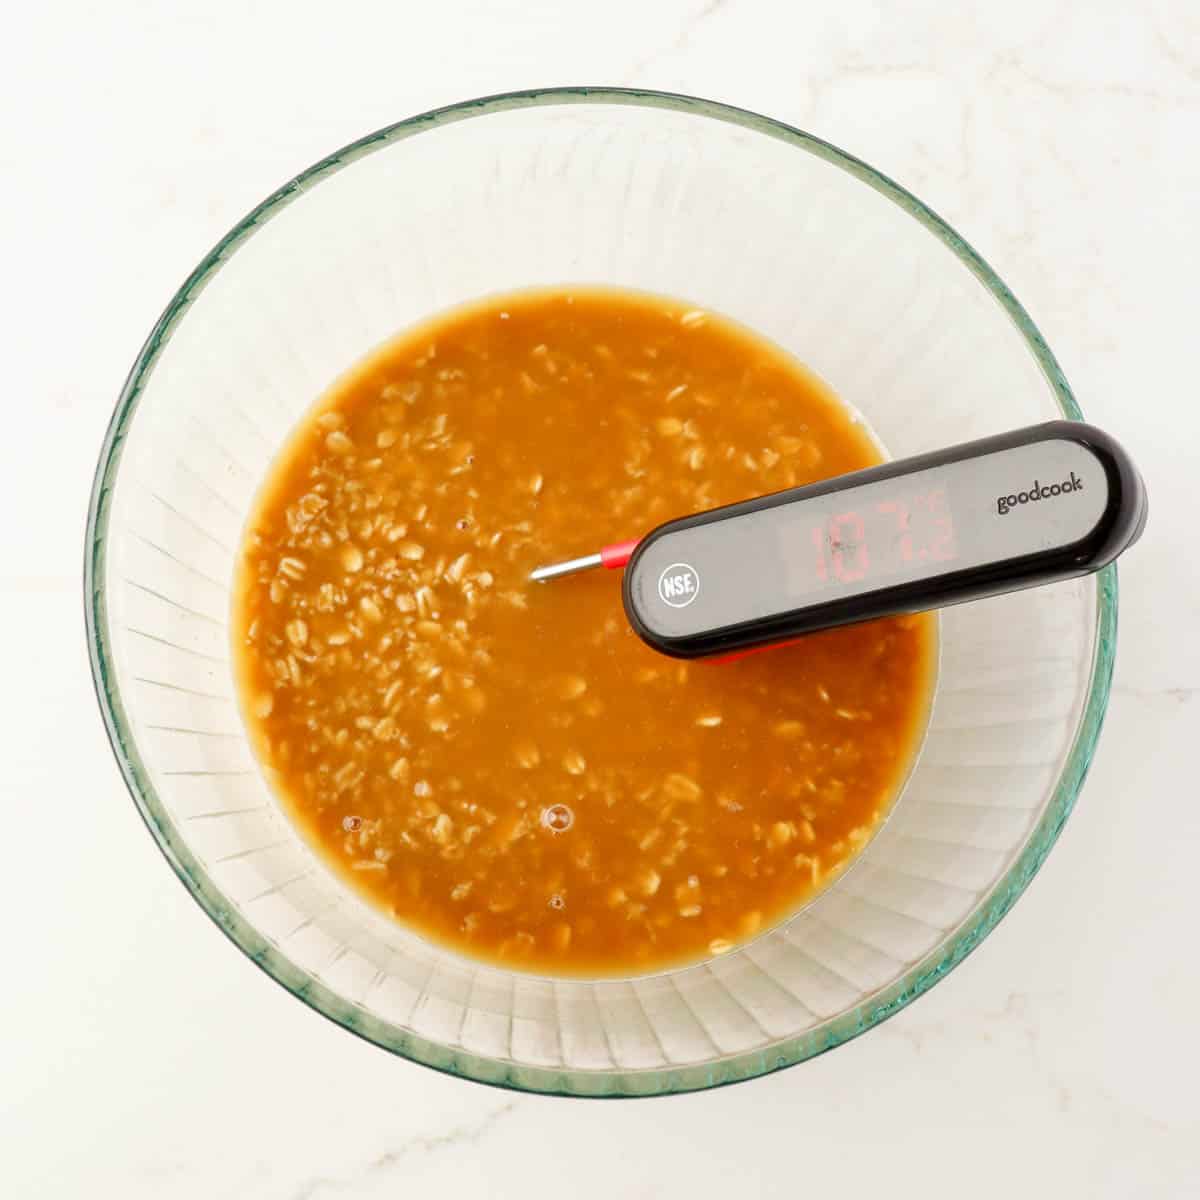 Oats, boiling water, molasses, brown sugar, and salt combined in a mixing bowl with a temperature probe.